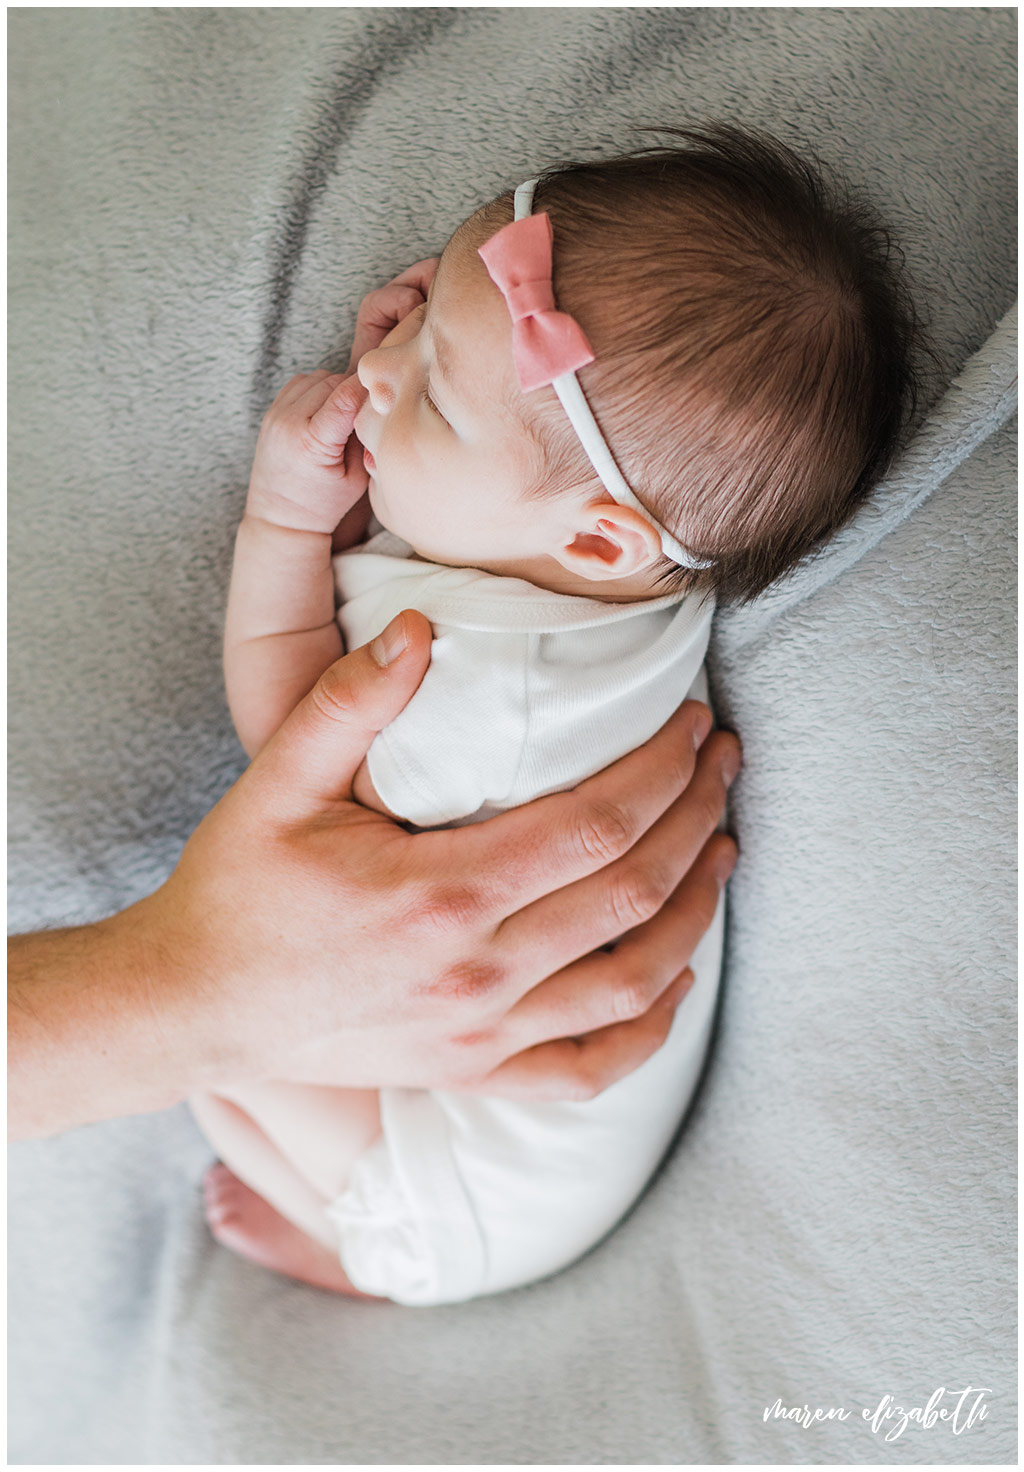 I get asked "What should our newborn wear in pictures?" Here are a couple practical tips on how to dress your newborn for pictures plus my #1 tip you'd probably never think of. | Maren Elizabeth Photography | Arizona Newborn Photographer